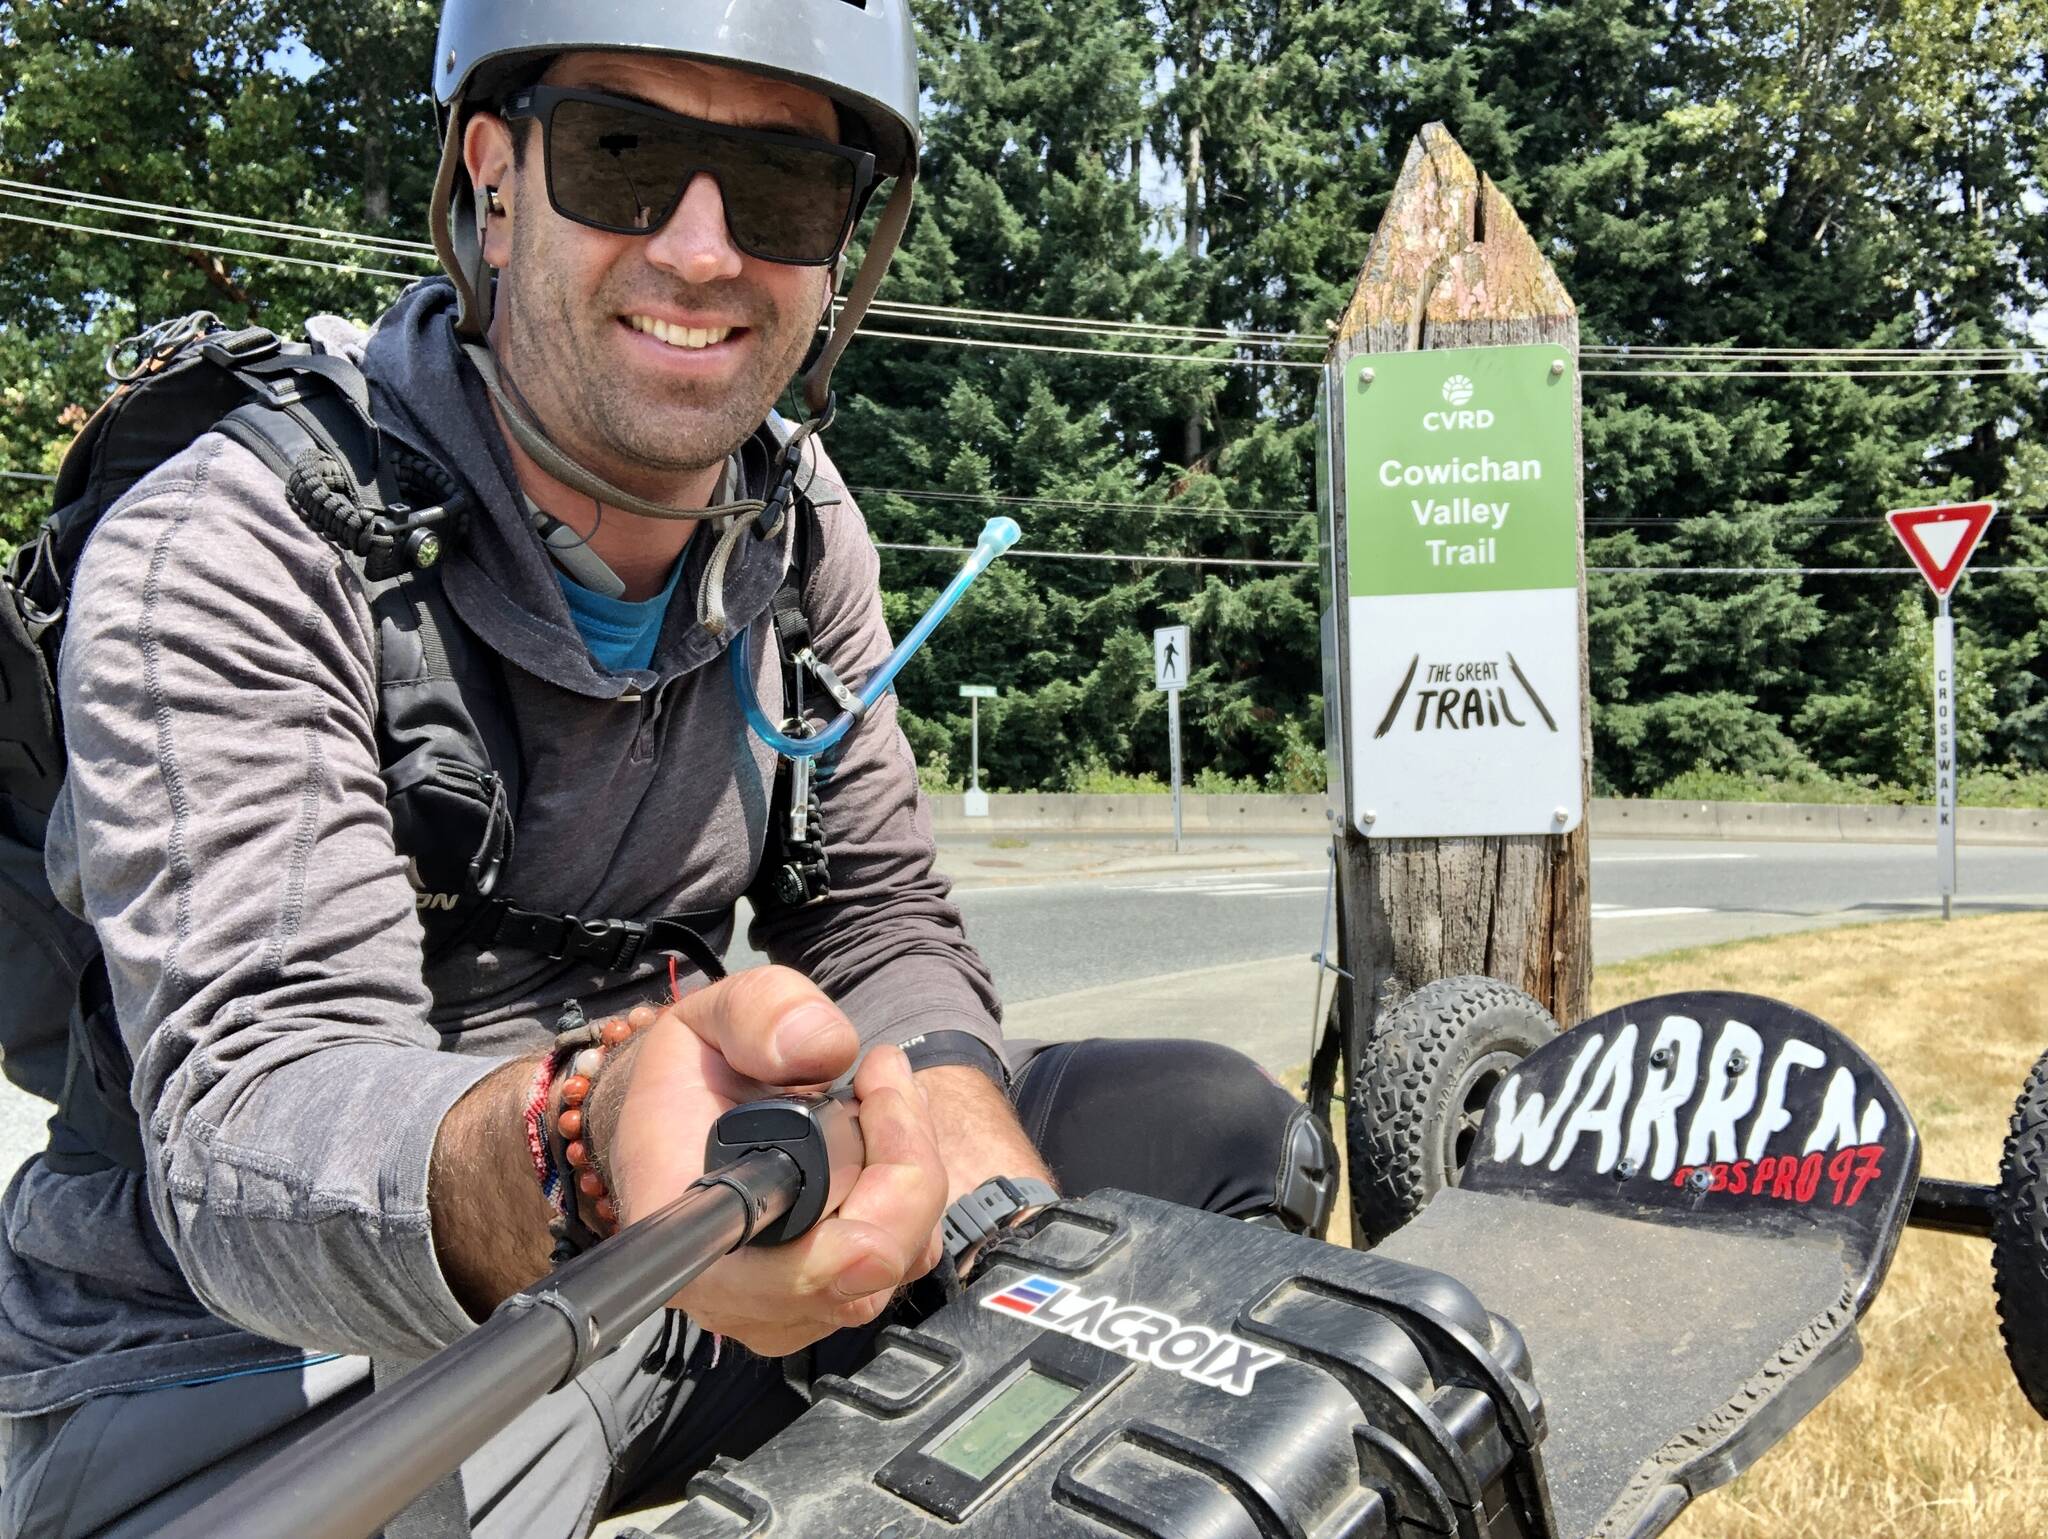 Bradley Smith will be cruising a portion of the Trans-Canada Trail in June on his electric mountain skateboard to break three Guinness World Records, including longest skateboard journey (Photos courtesy of Bradley Smith)